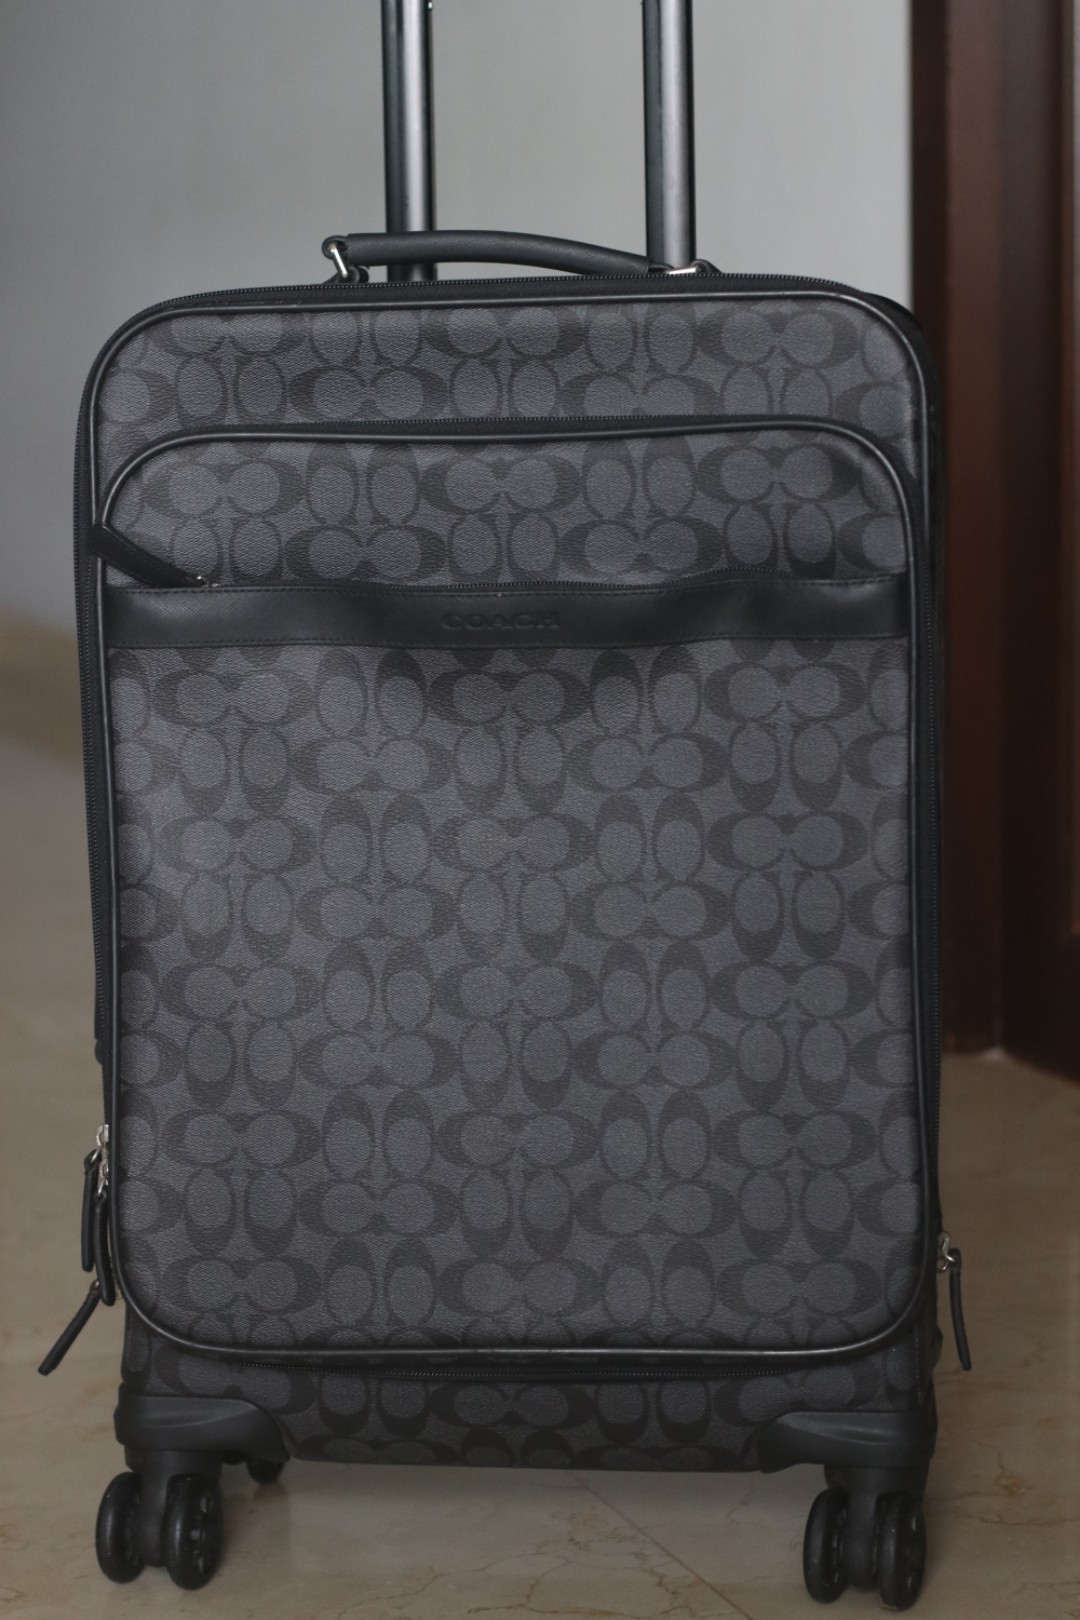 Coach Cabin Luggage bag, Hobbies & Toys, Travel, Luggage on Carousell